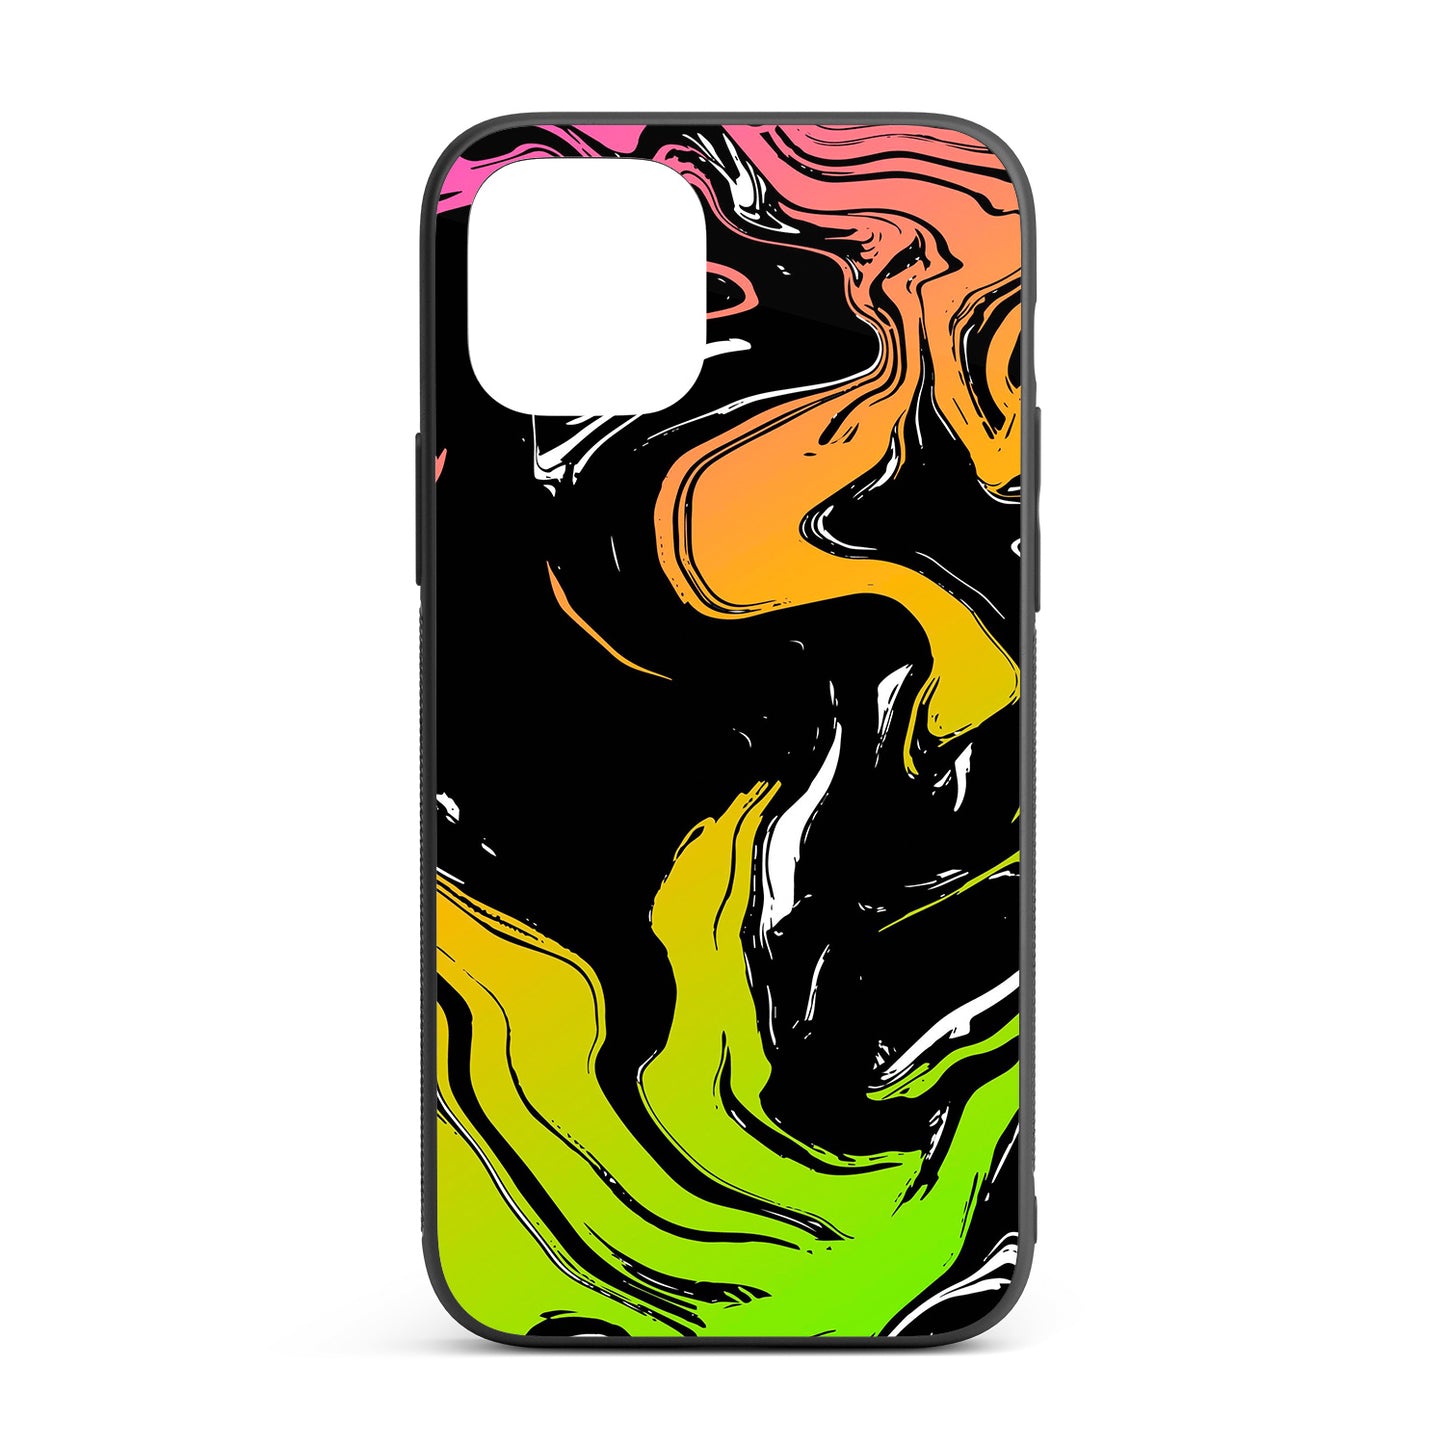 Acid marble pattern iPhone glass case